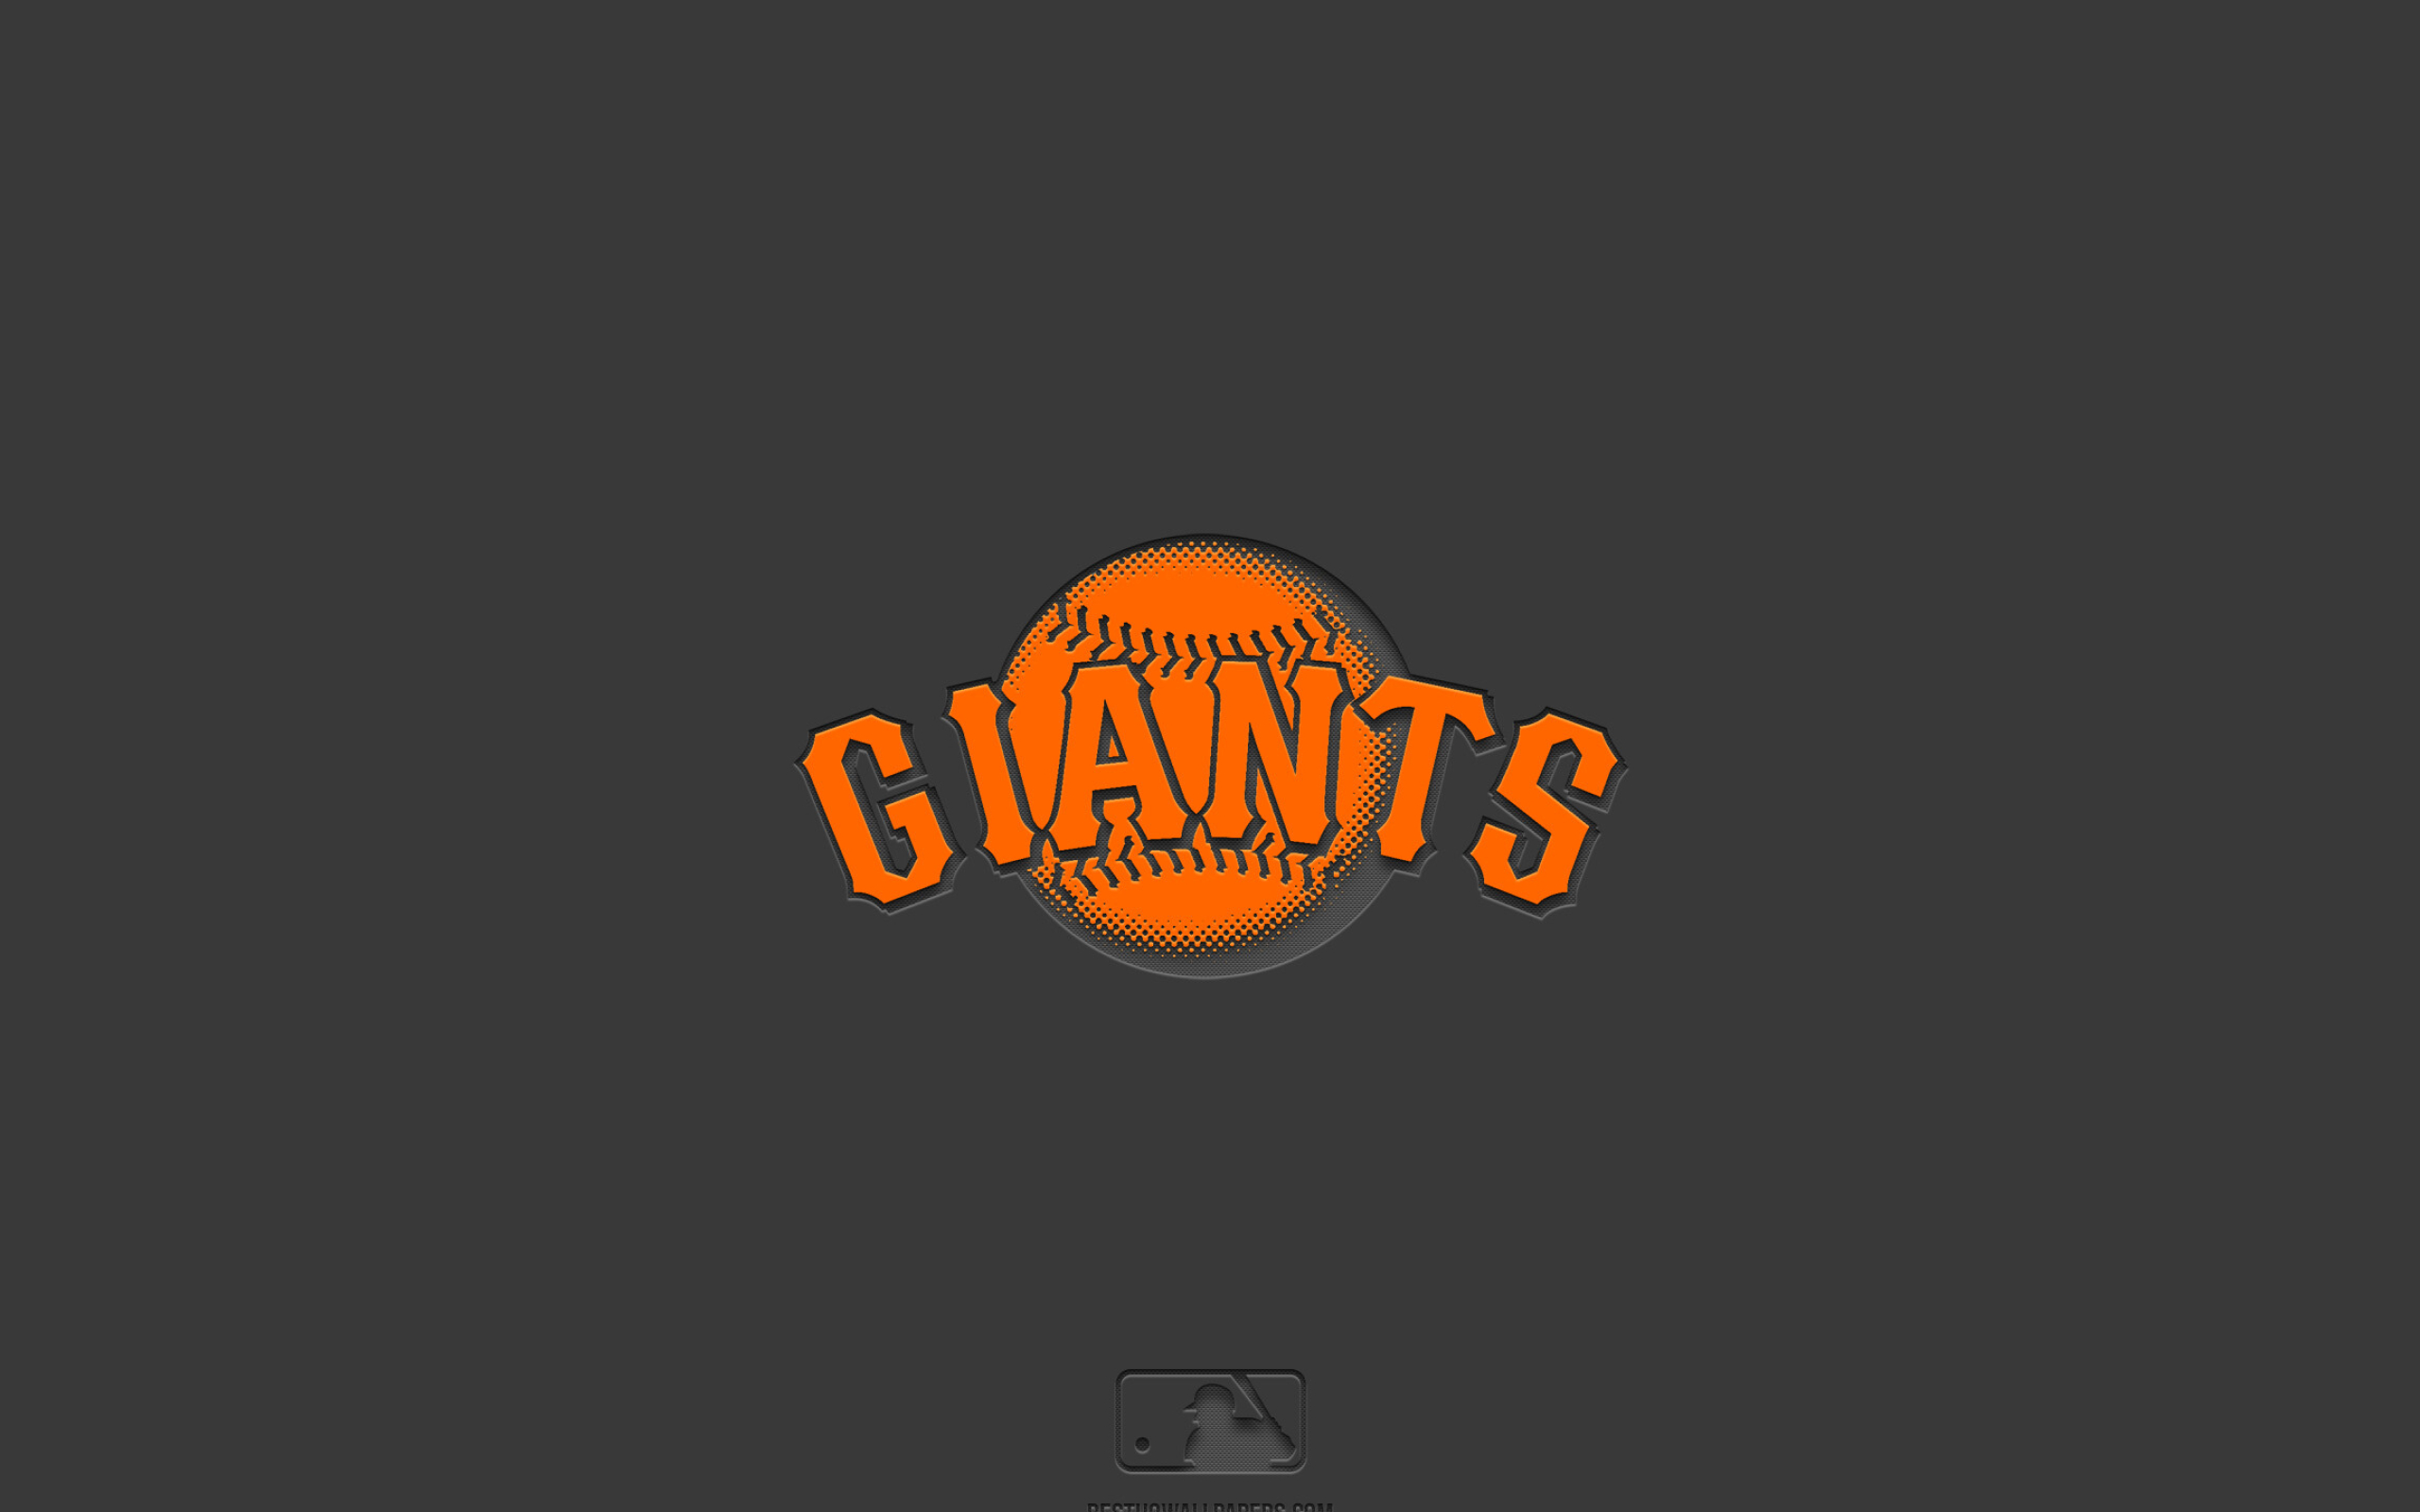 San Francisco Giants: One of the oldest and most successful franchises in professional baseball. 2560x1600 HD Background.